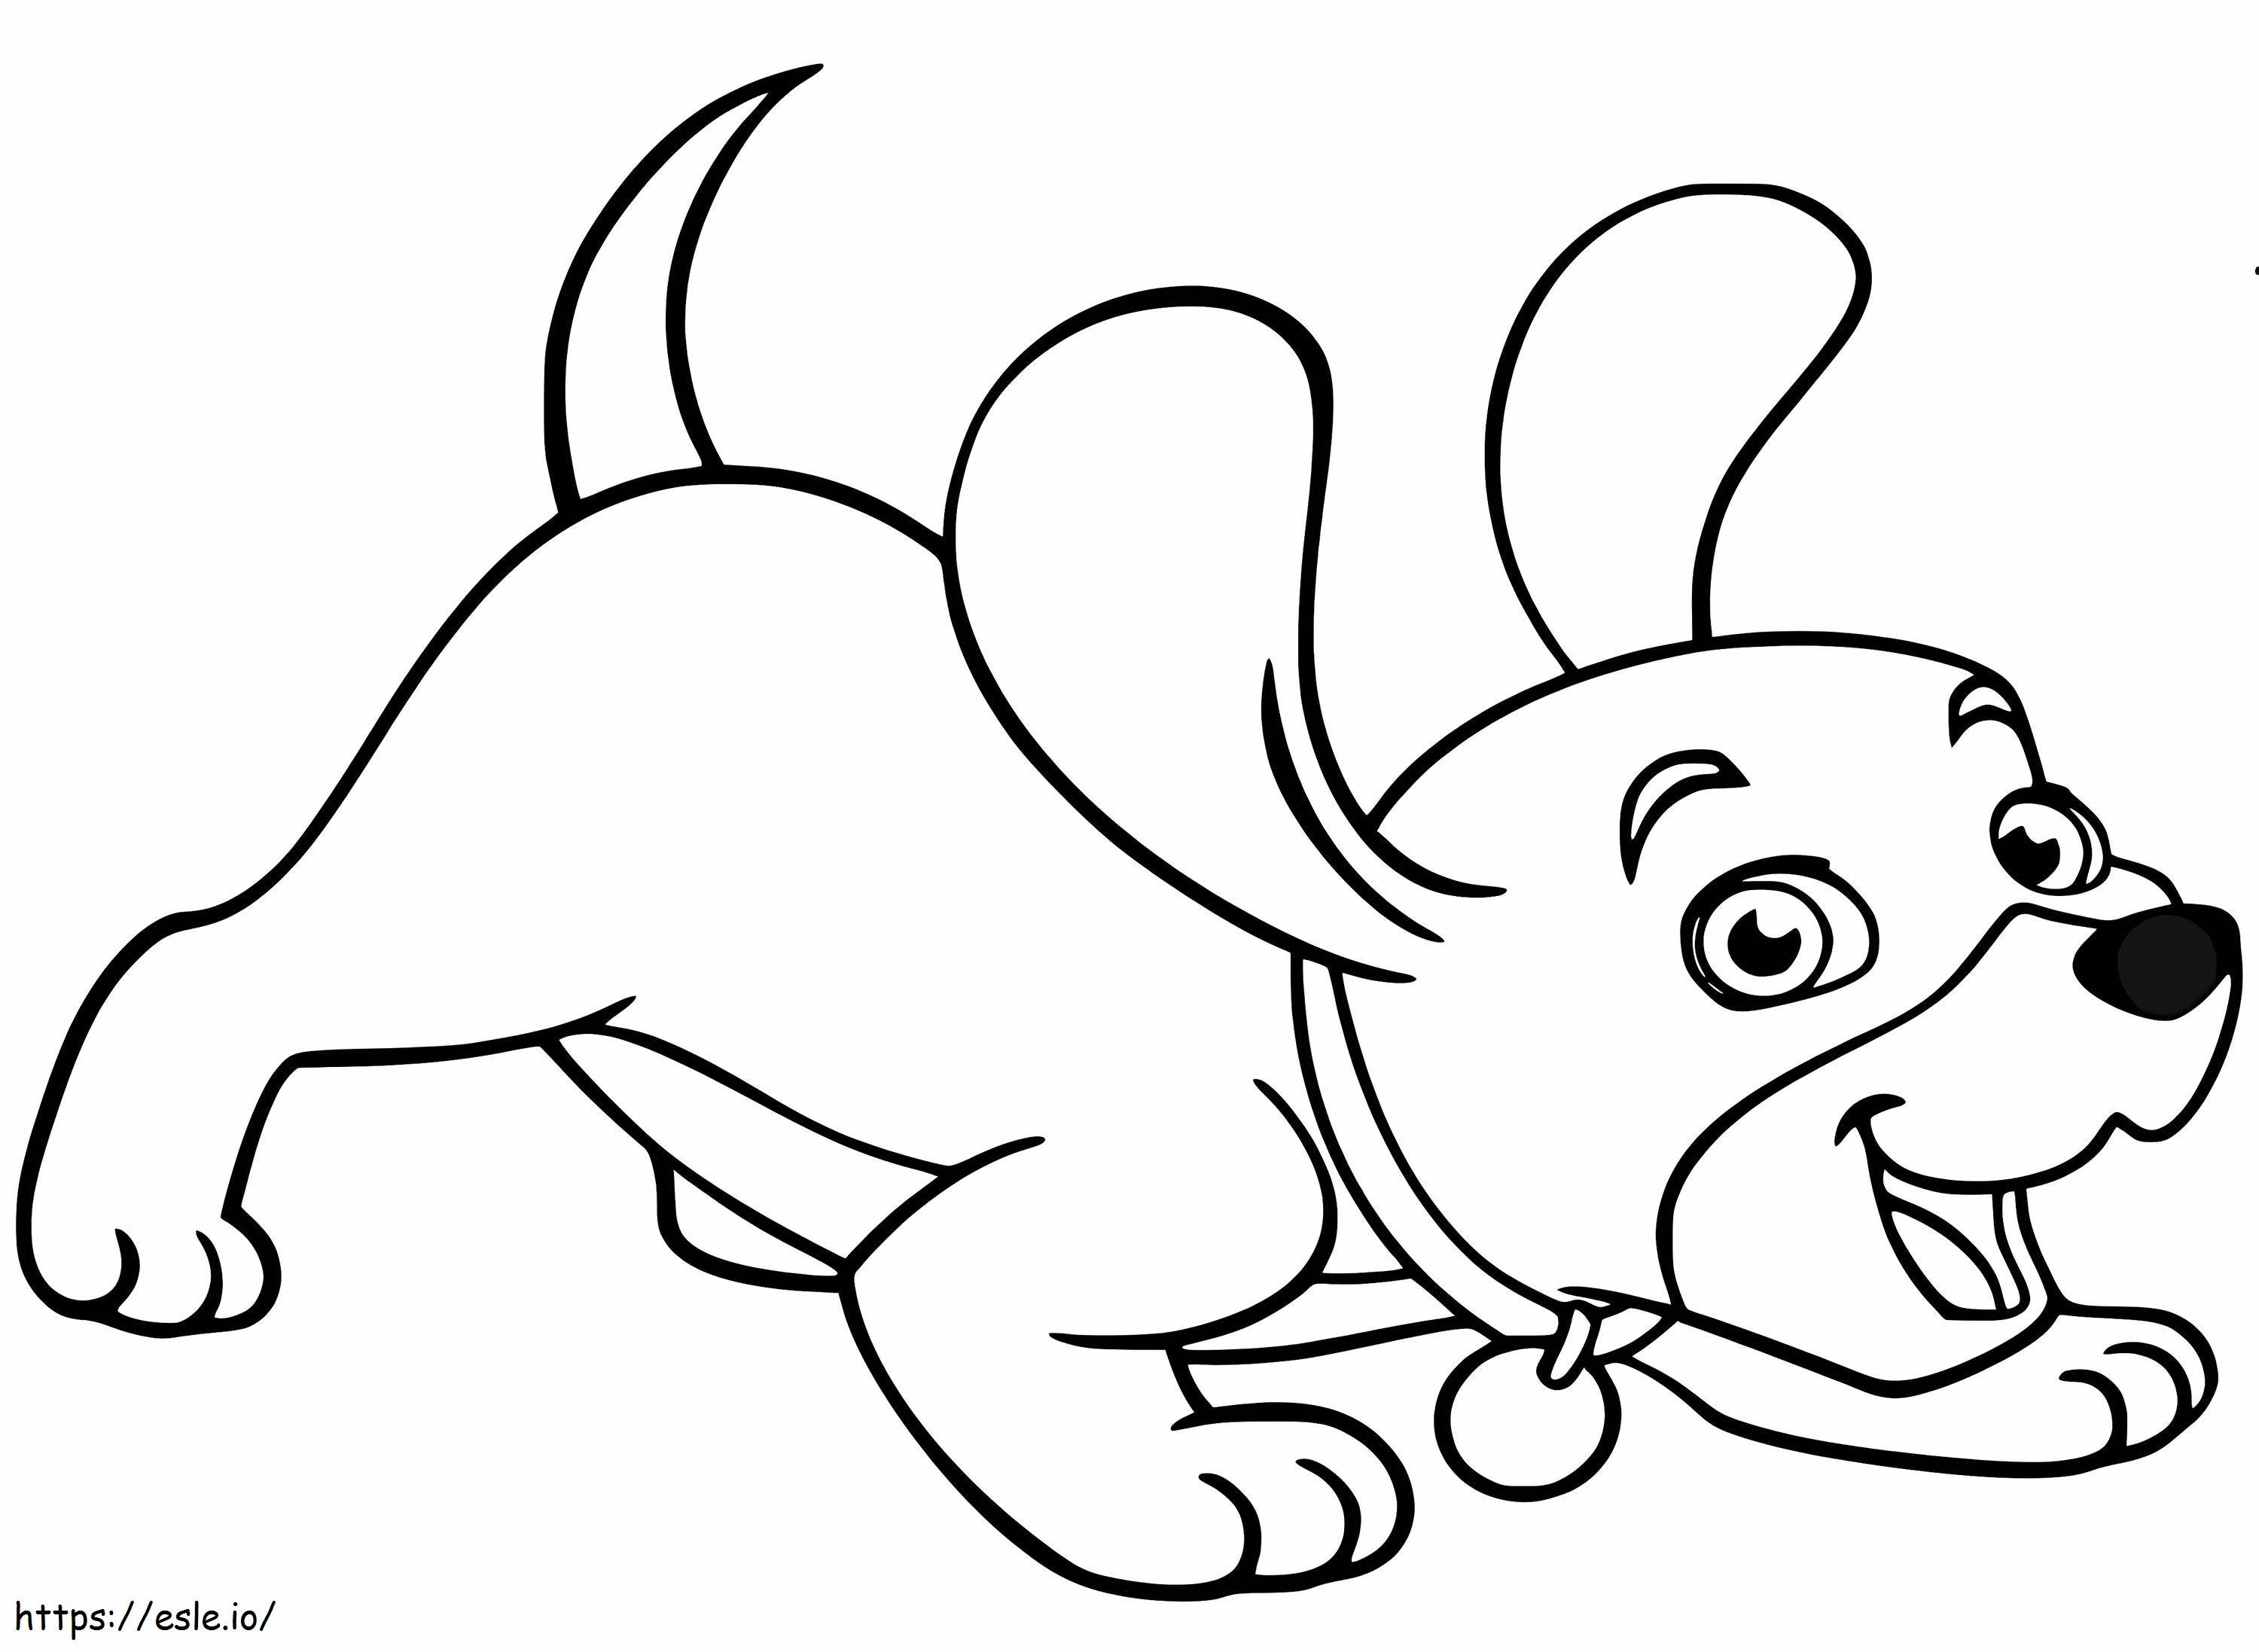 Puppy Laughing coloring page